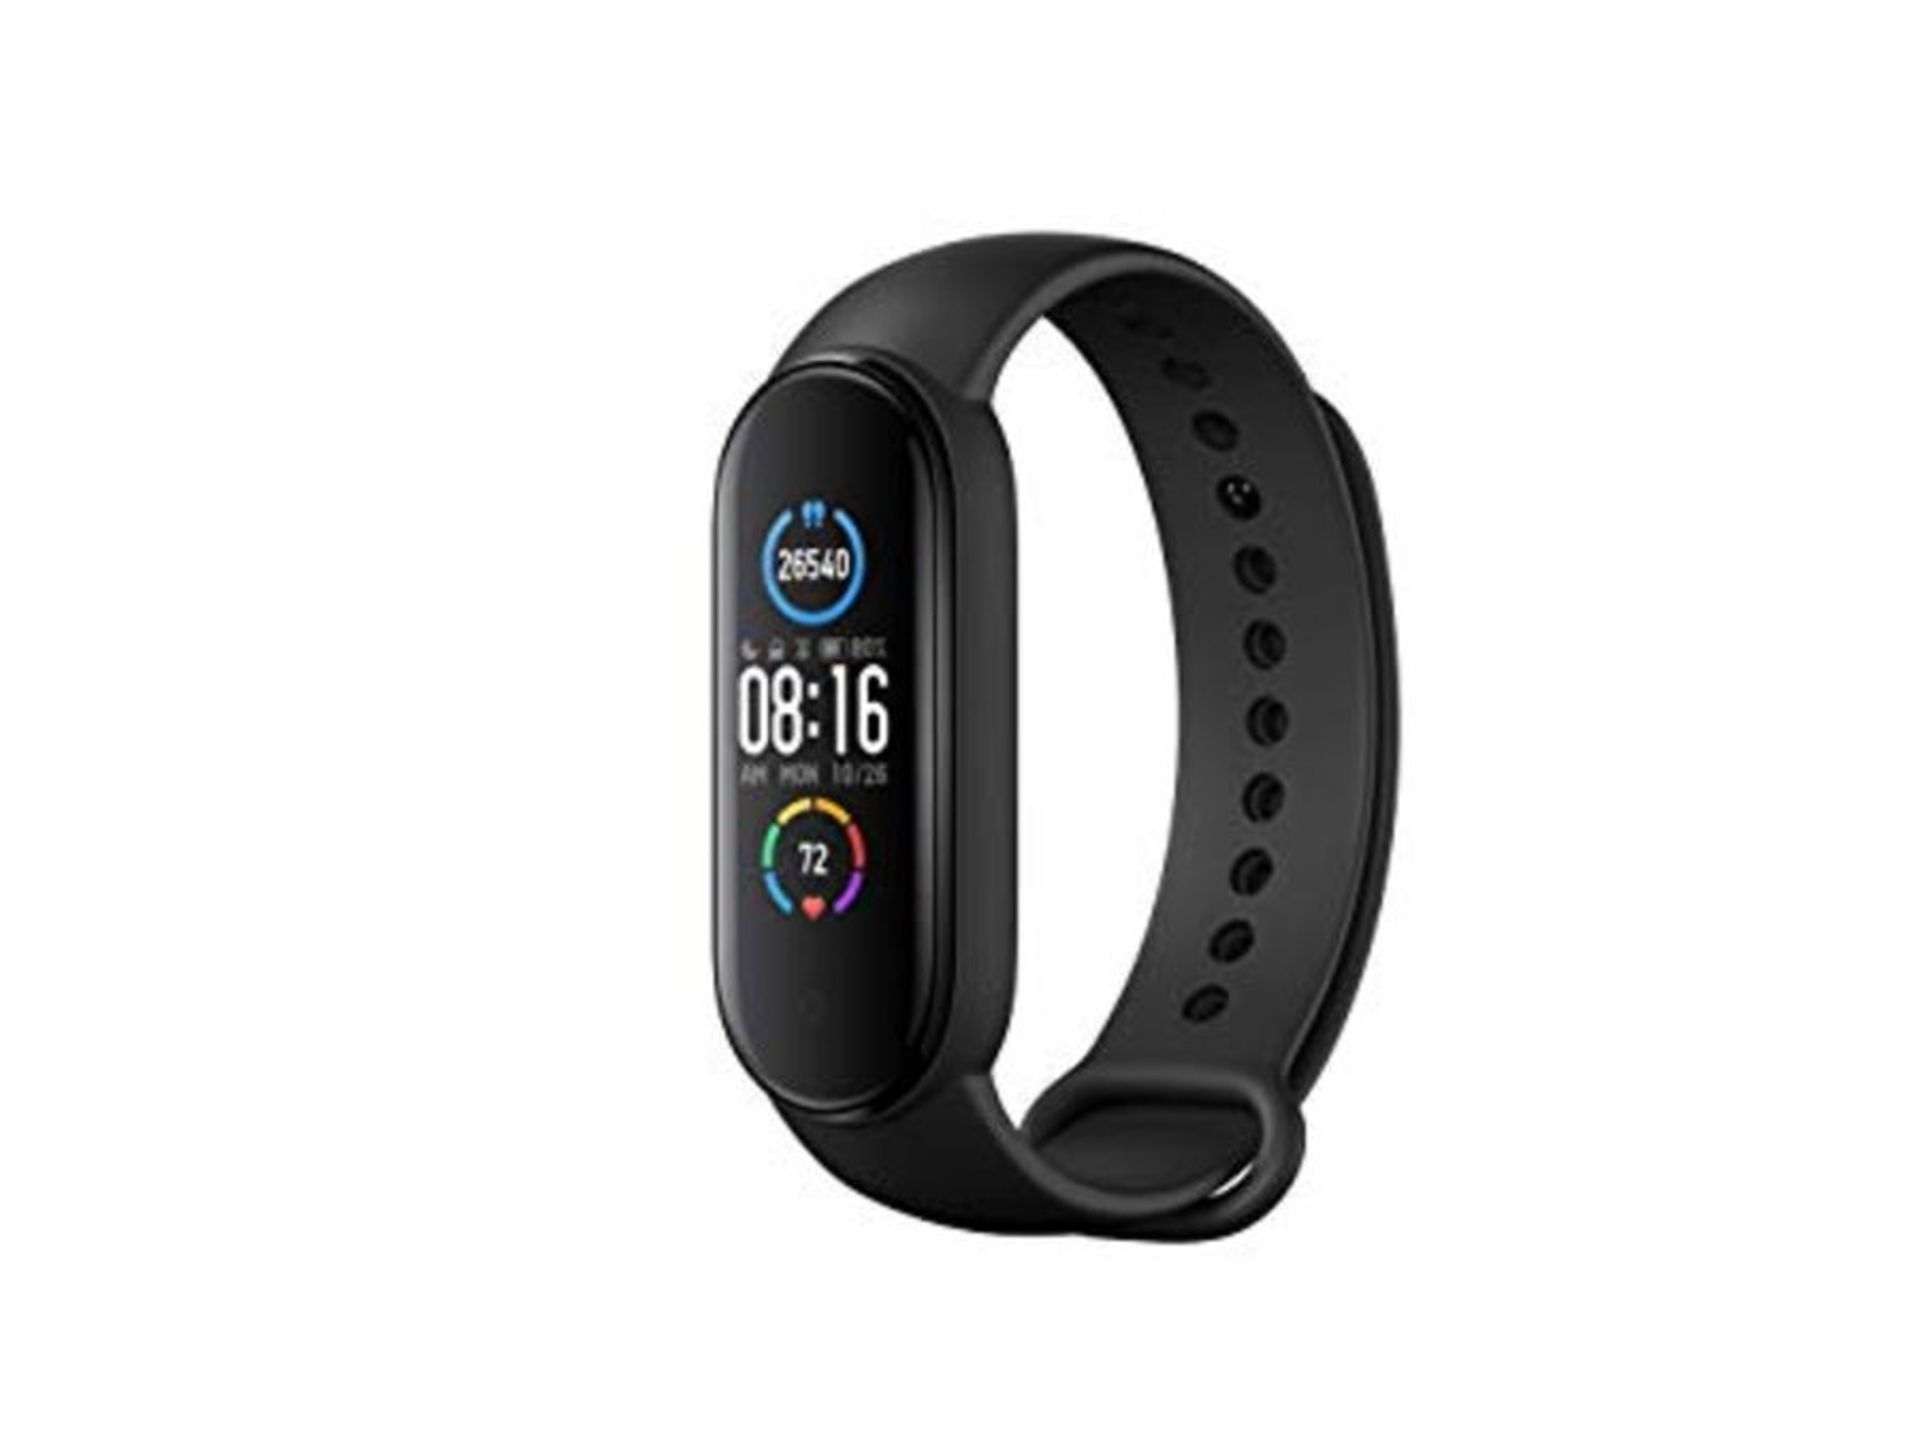 [INCOMPLETE] Xiaomi Mi Band 5 Black Health and Fitness Tracker, Upto 14 Days Battery,